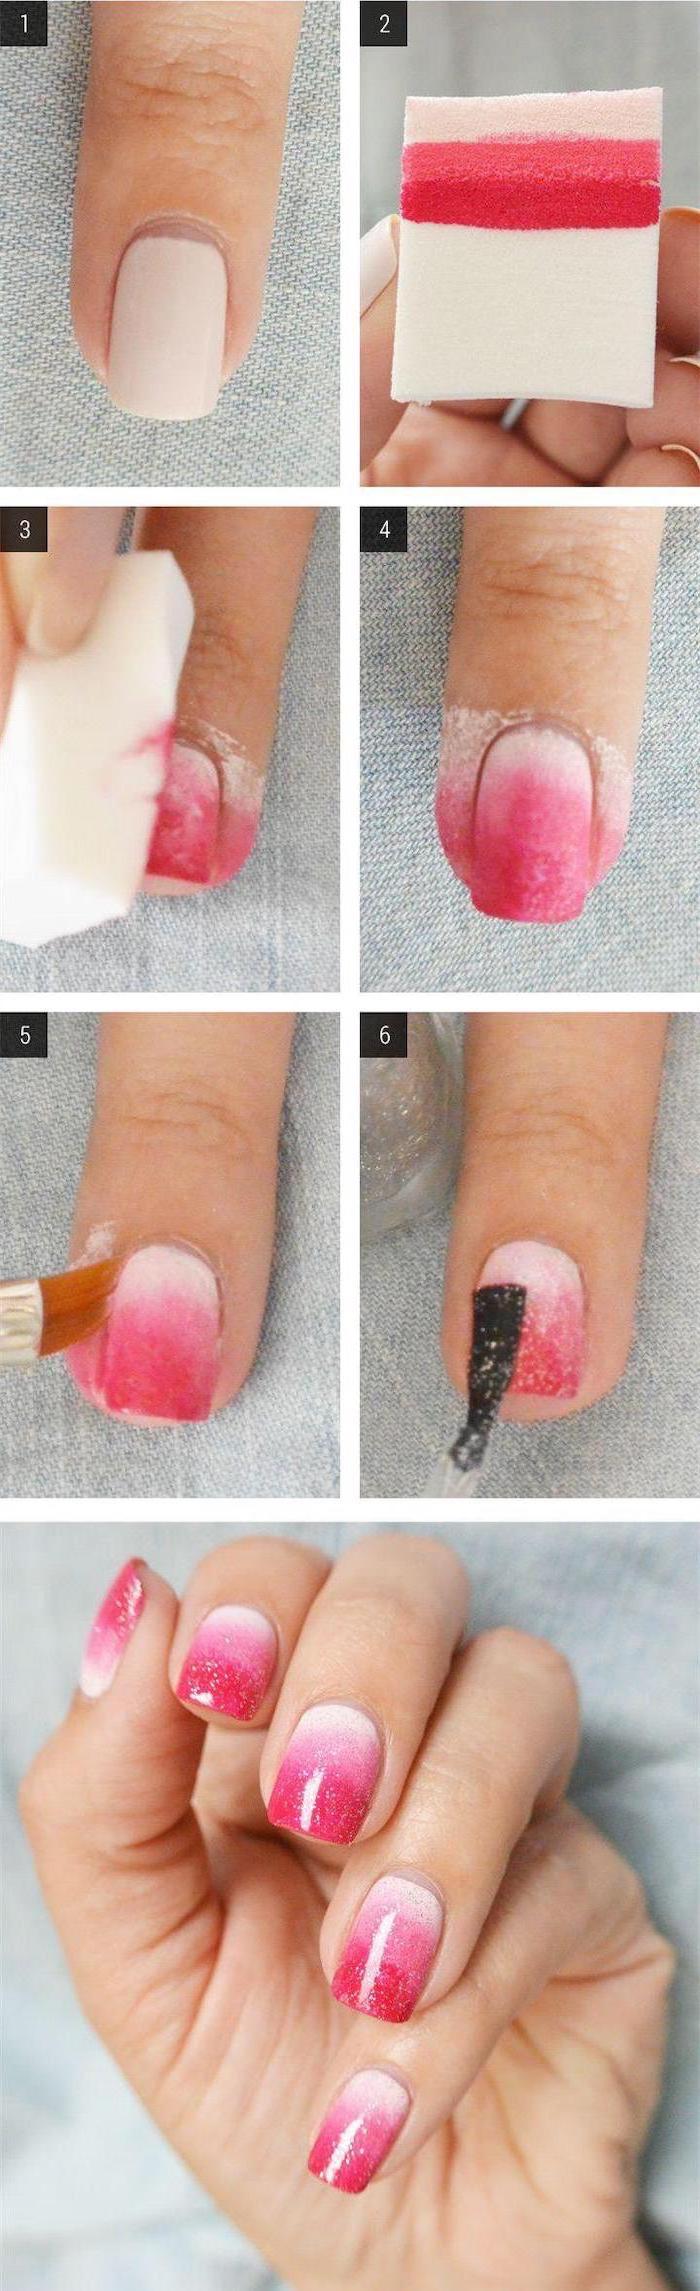 step by step diy tutorial, white to light and dark pink gradient nail polish, french ombre nails, how to do ombre nails